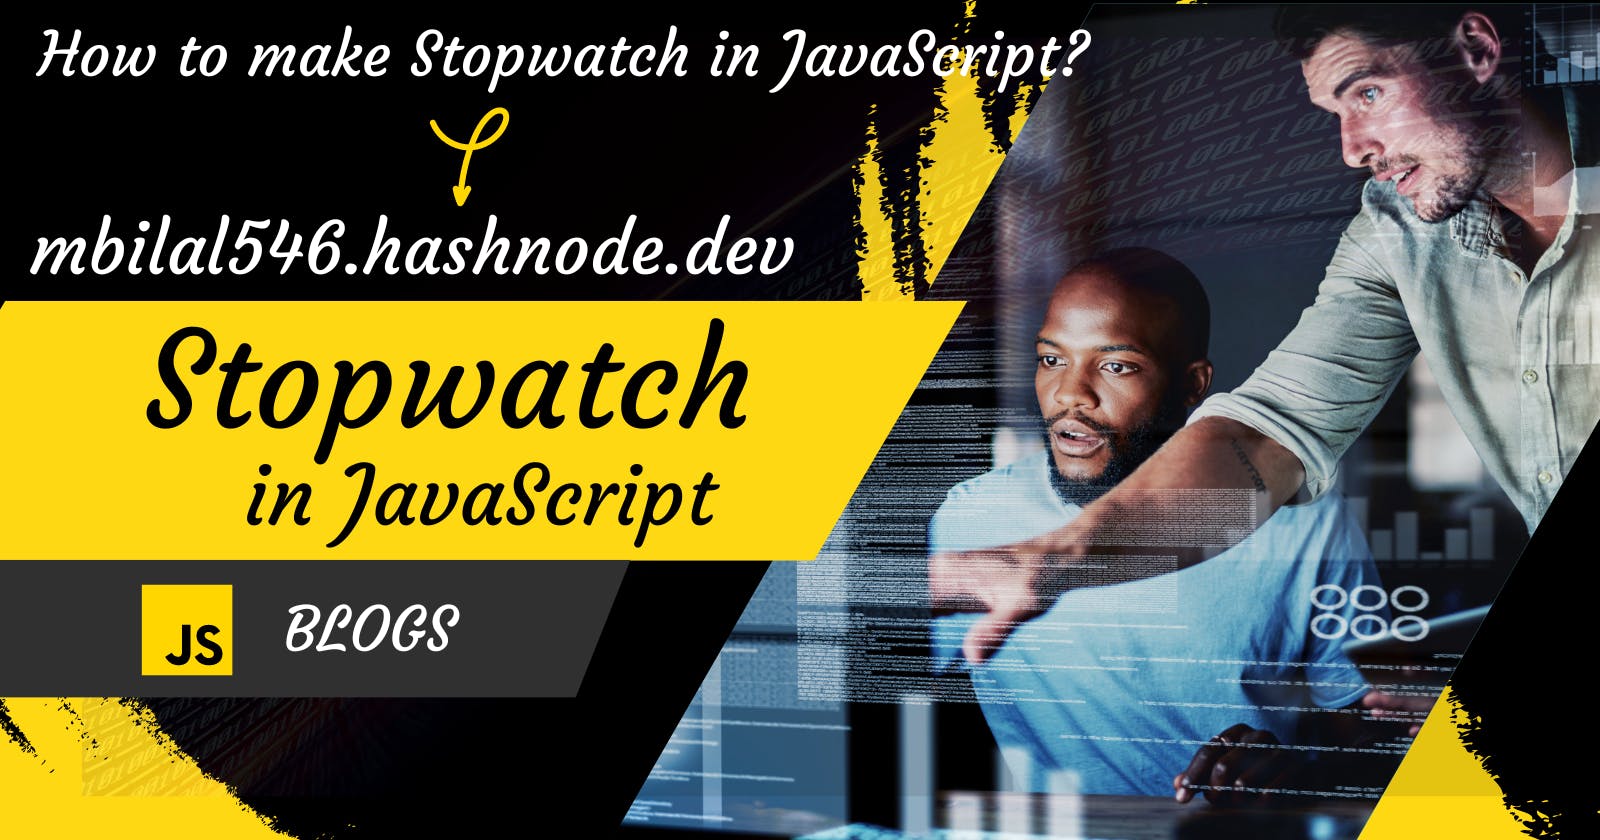 How to make a stopwatch in JavaScript?